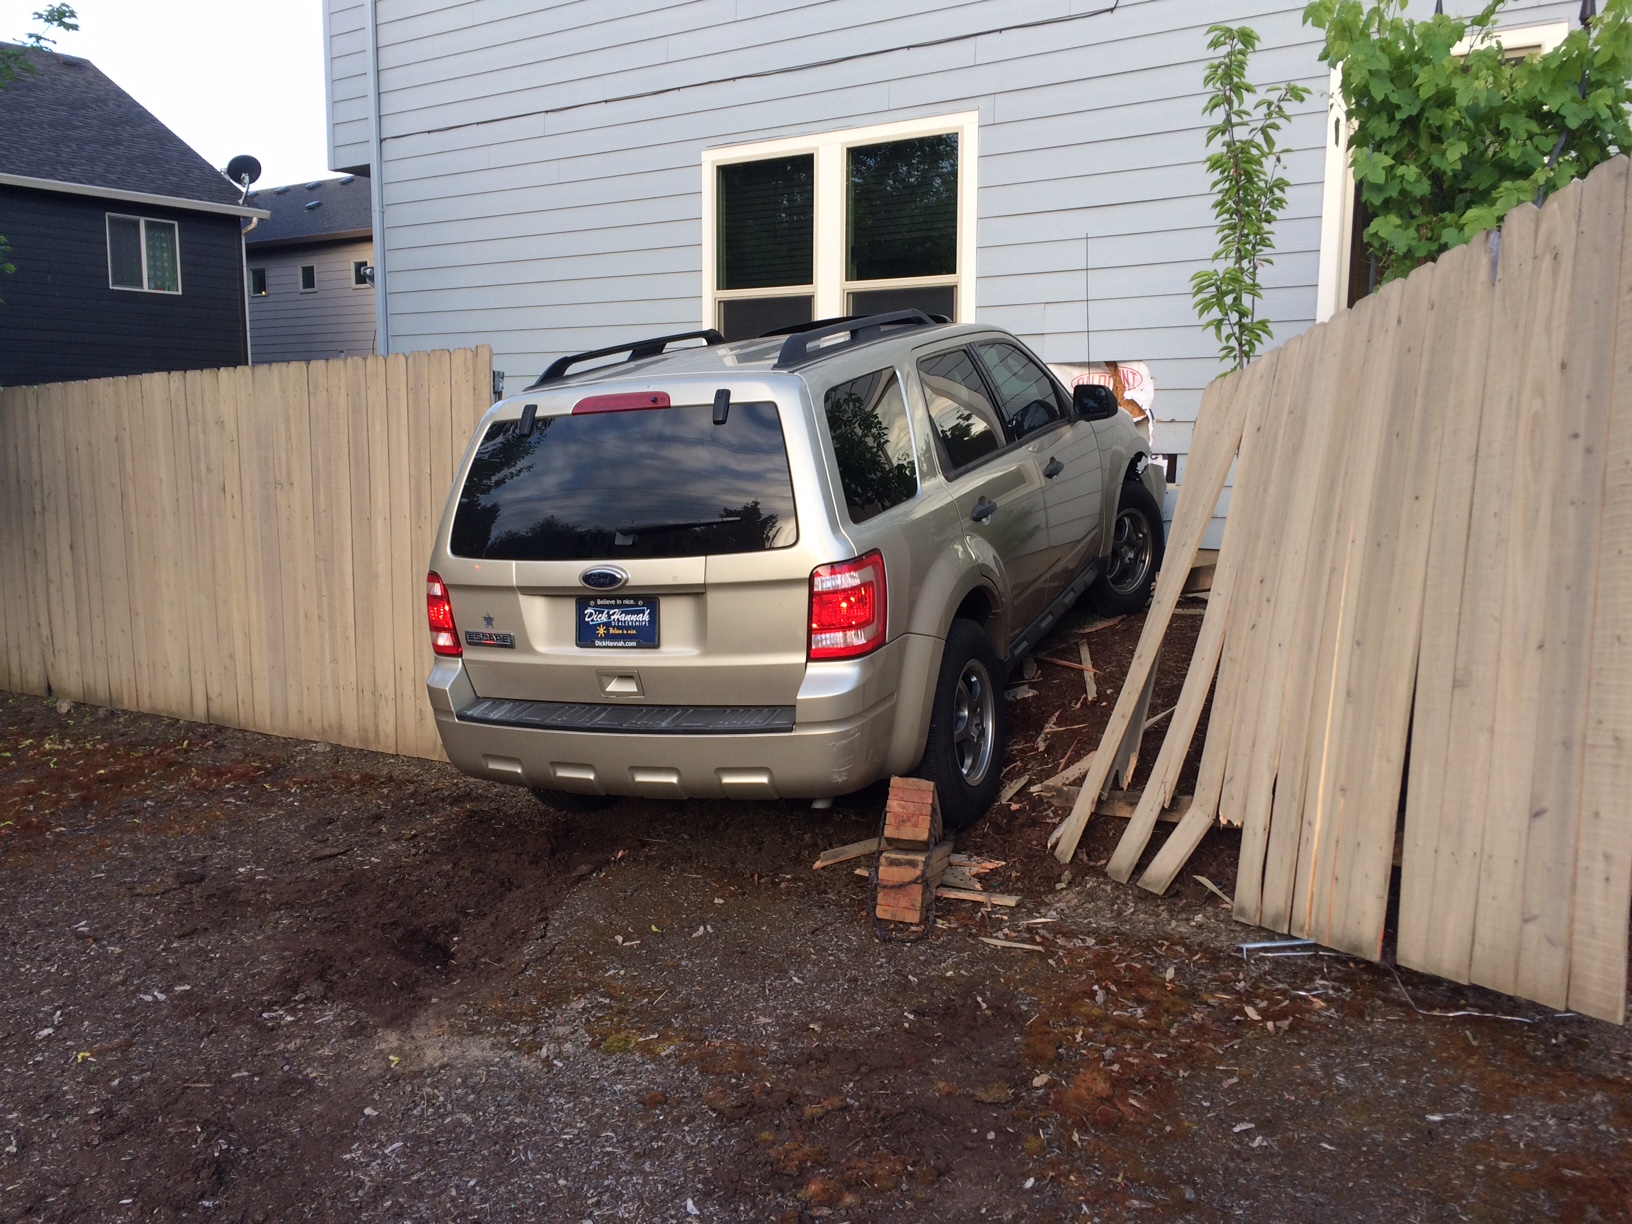 No one was hurt when this SUV crashed through a fence and into a home in the Felida area Monday morning.